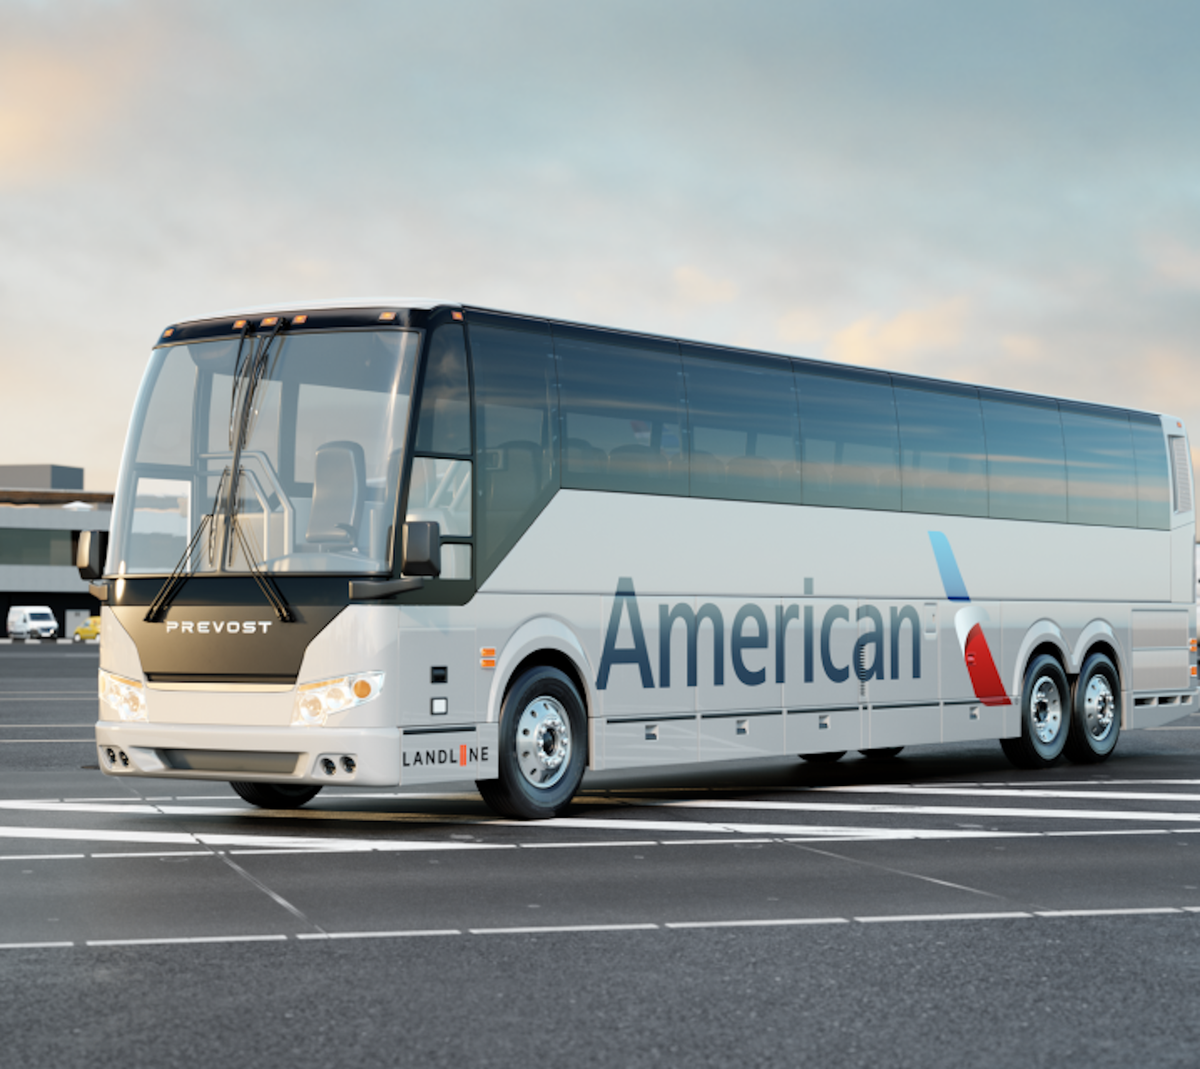 American Airlines, Landline Get TSA Approval for Bus-to-Plane Service